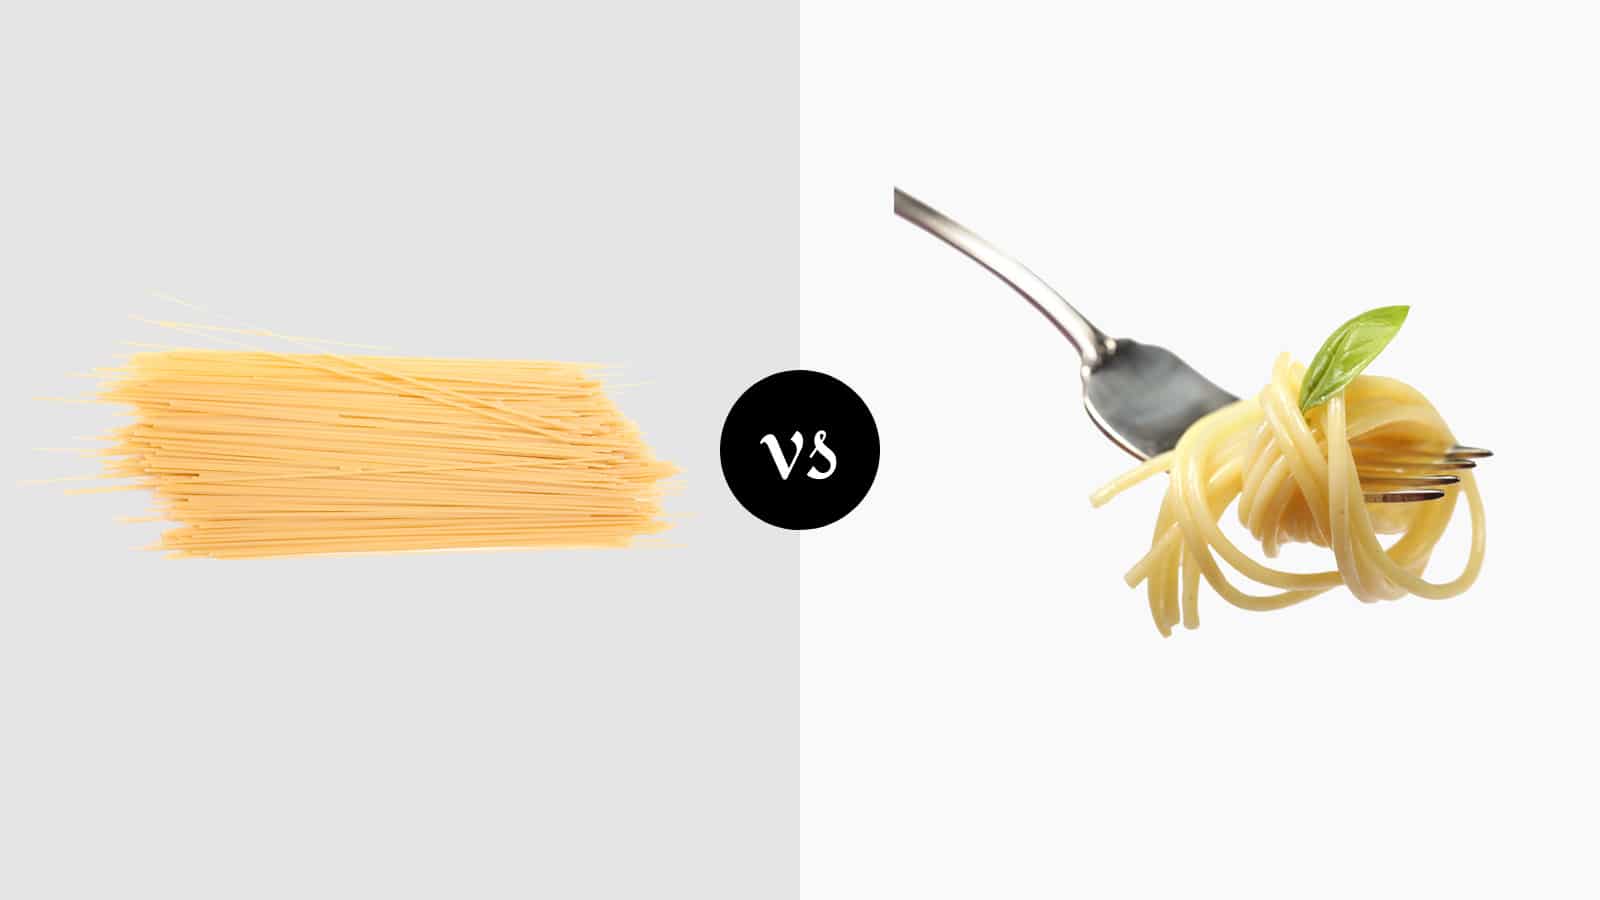 Dry vs Cooked Pasta Weight - How Much Difference?